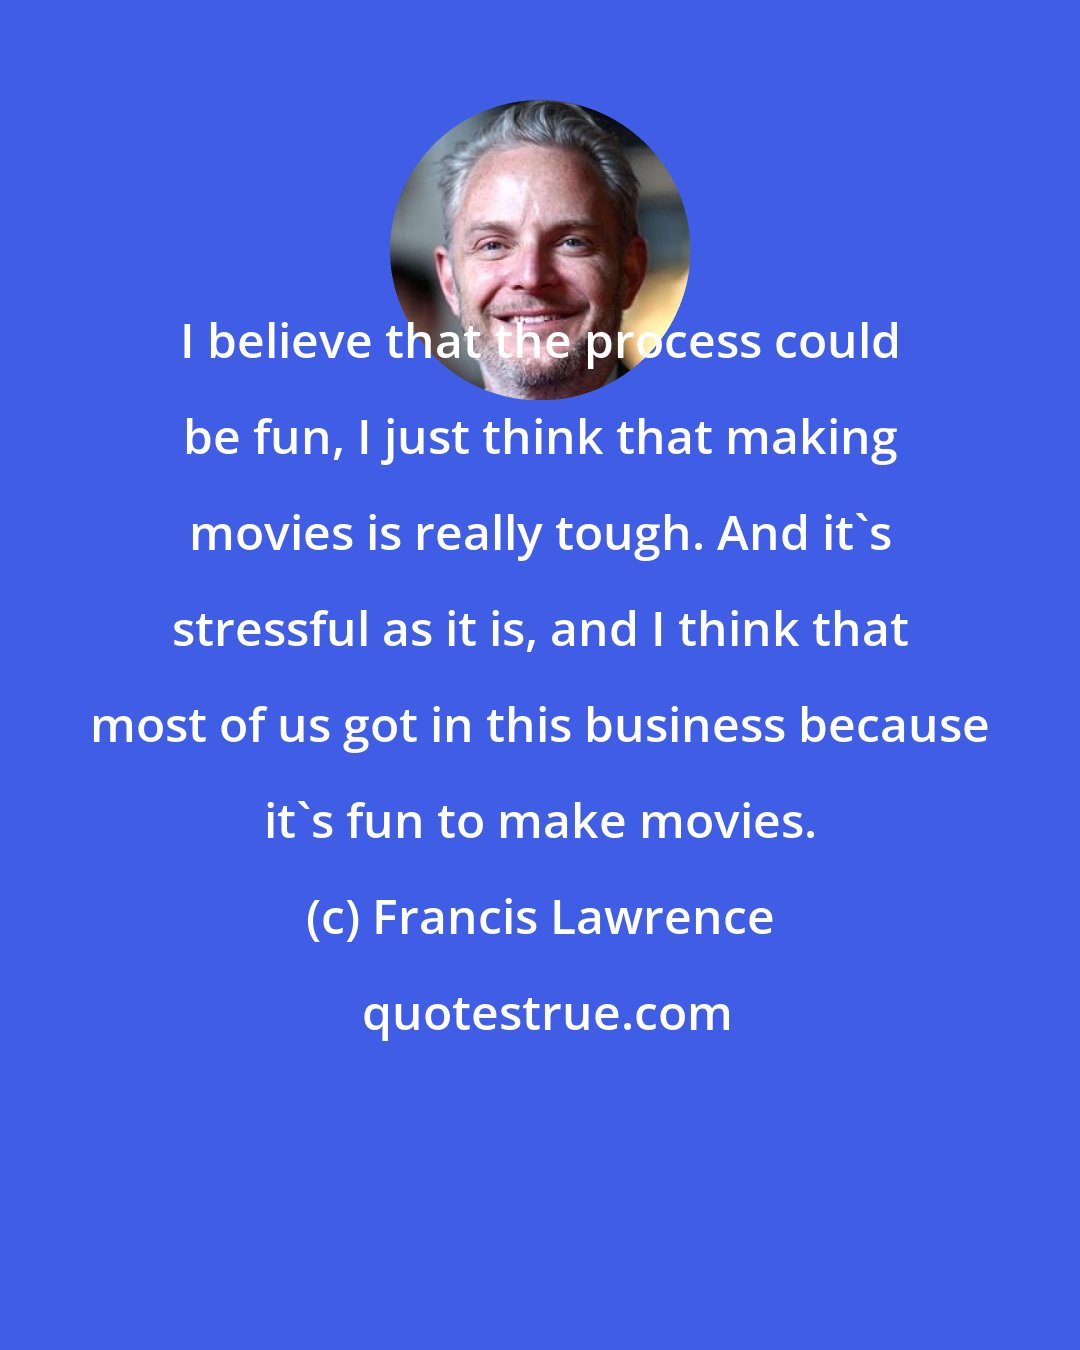 Francis Lawrence: I believe that the process could be fun, I just think that making movies is really tough. And it's stressful as it is, and I think that most of us got in this business because it's fun to make movies.